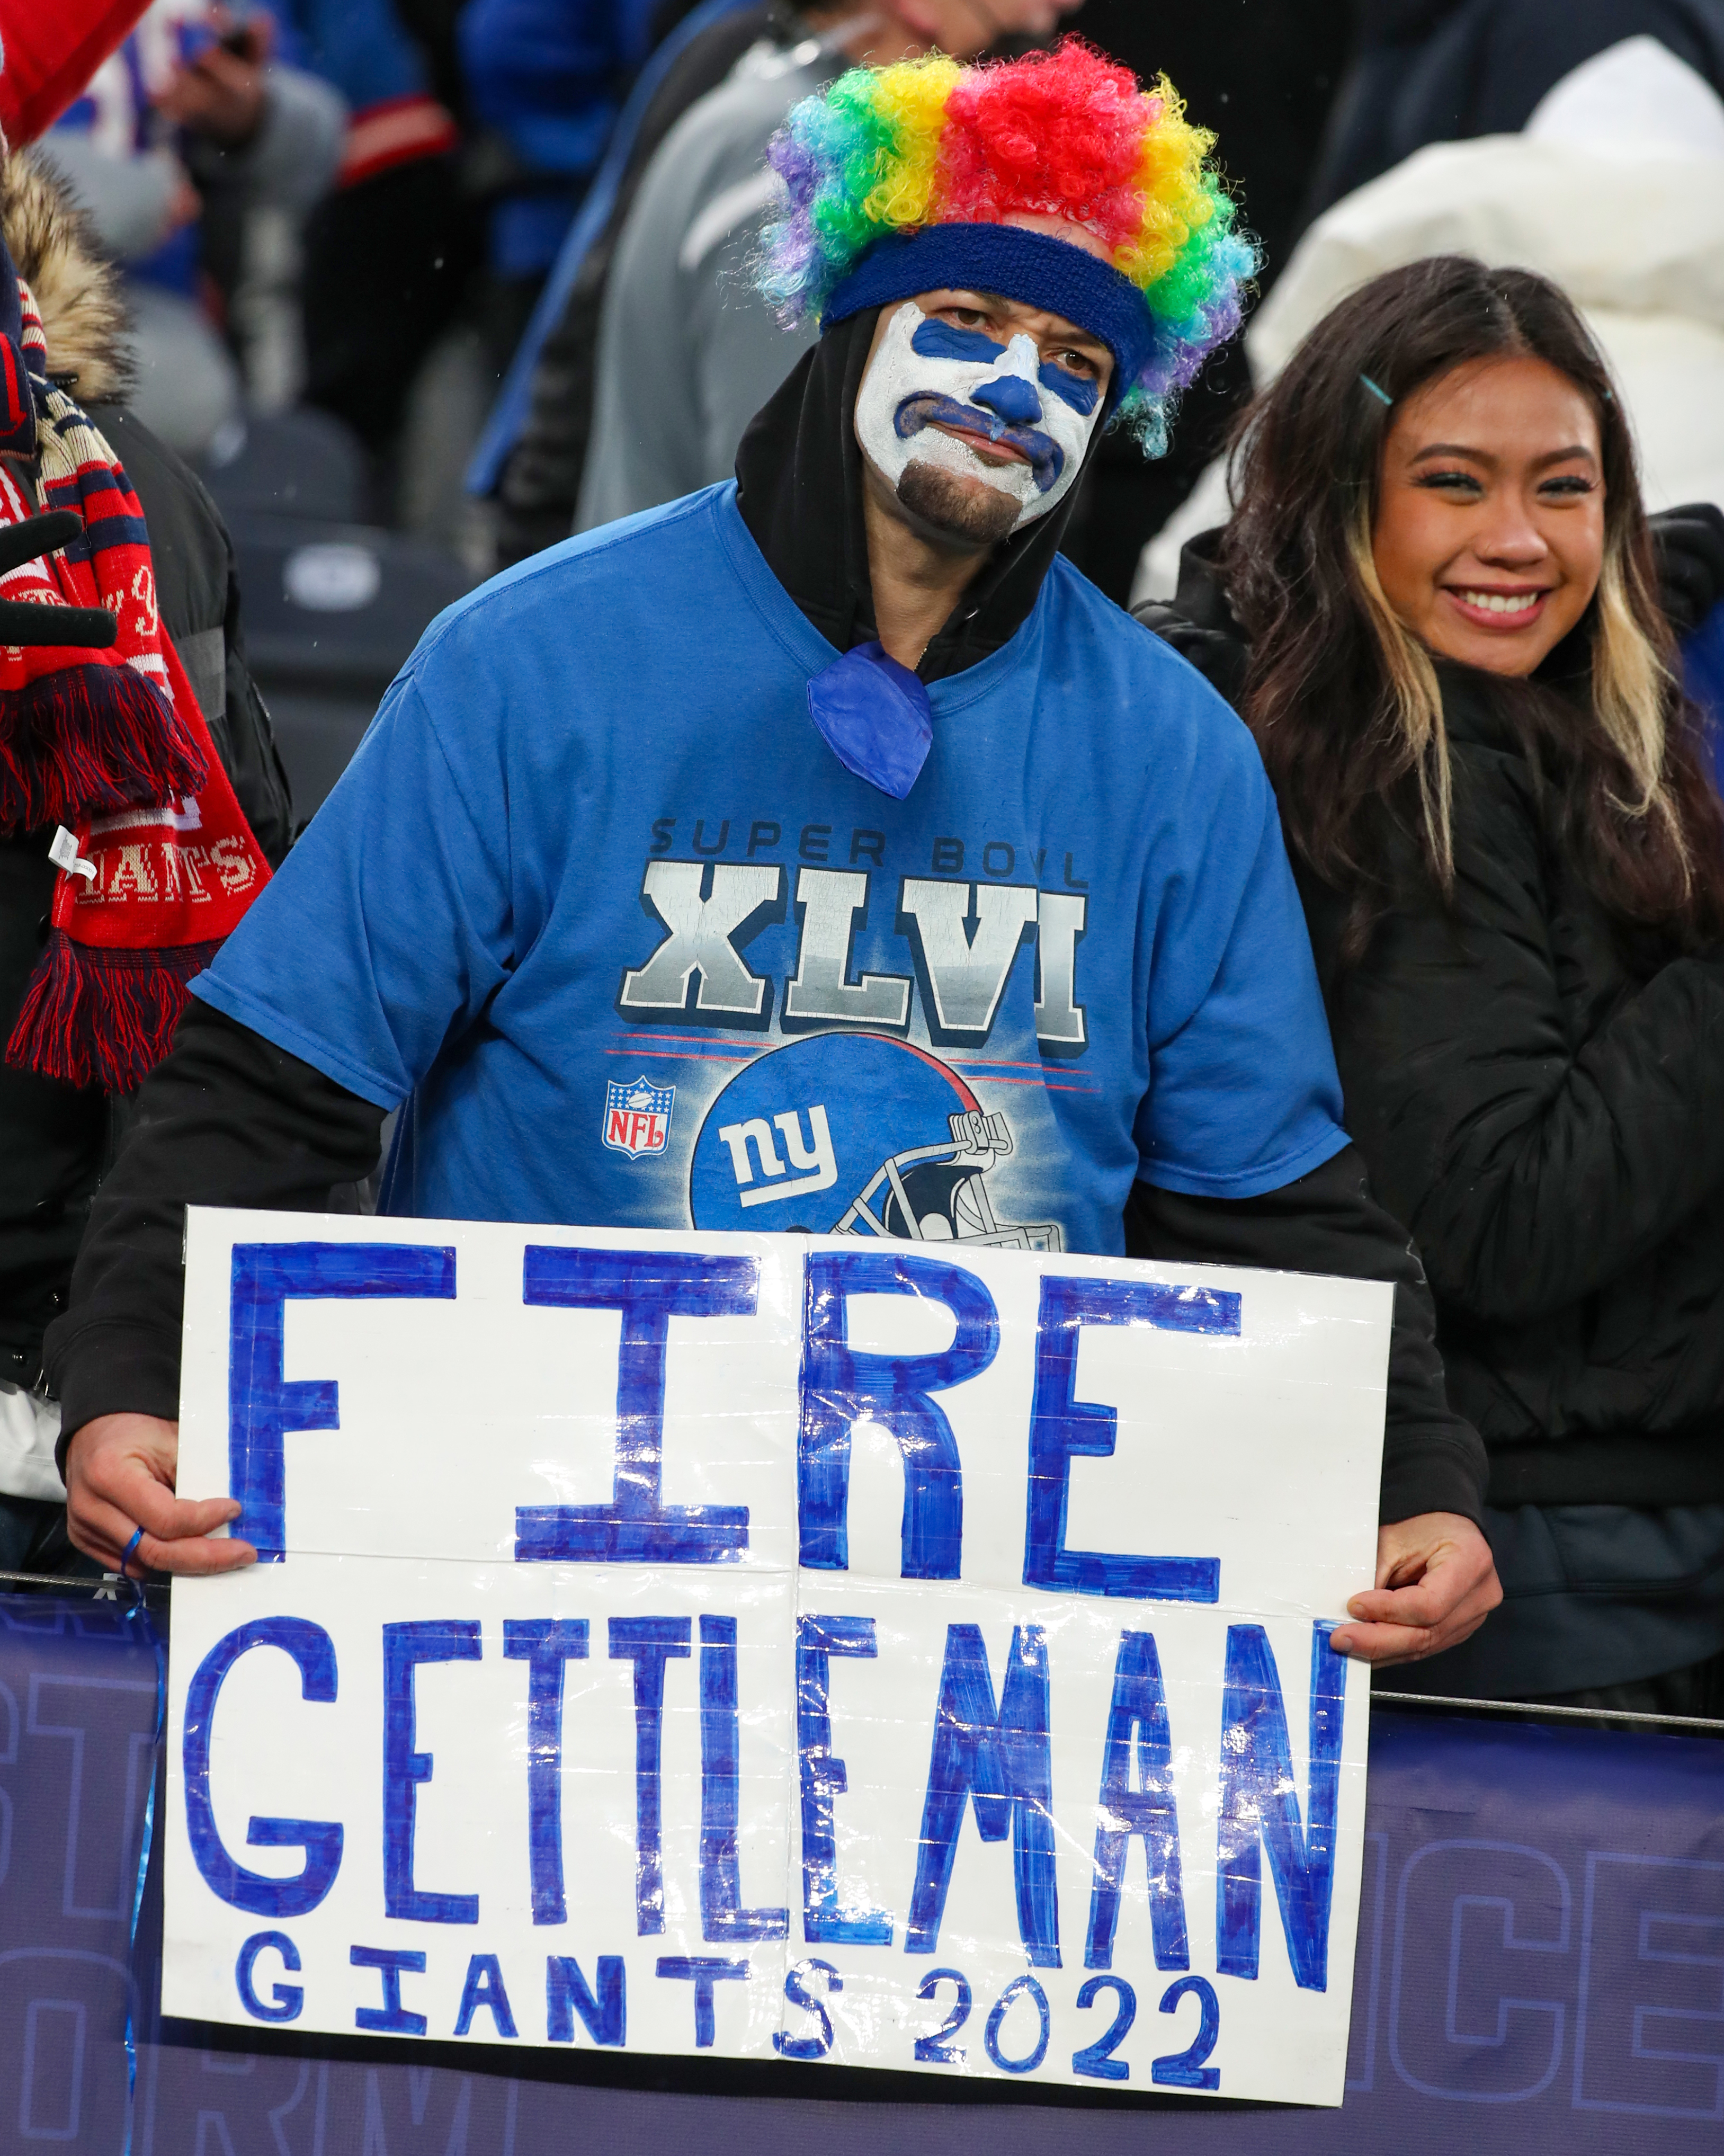 A fan dressed as a clown holds up a sign after the Giants lost 22-7 to Washington Football Team on Sunday, Jan. 9, 2022 in East Rutherford, N.J.